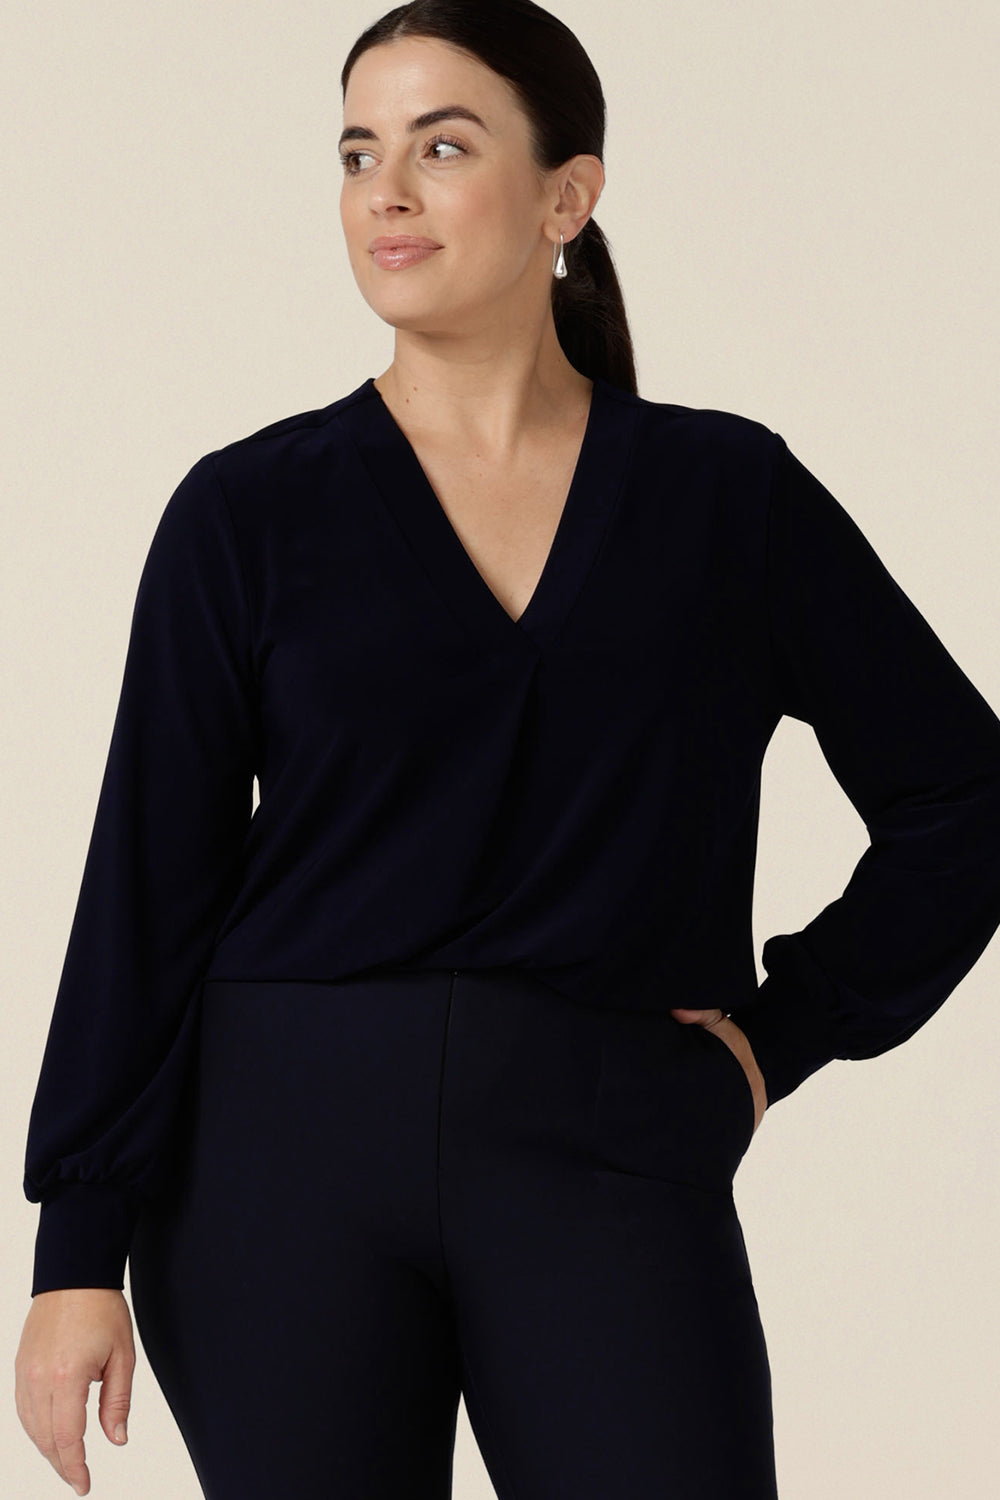 A woman wears a V-neck, long sleeve jersey top in navy blue. Made in Australia by women's clothing label, Leina & Fleur, this great work top is available to shop online in sizes 8 to 24.